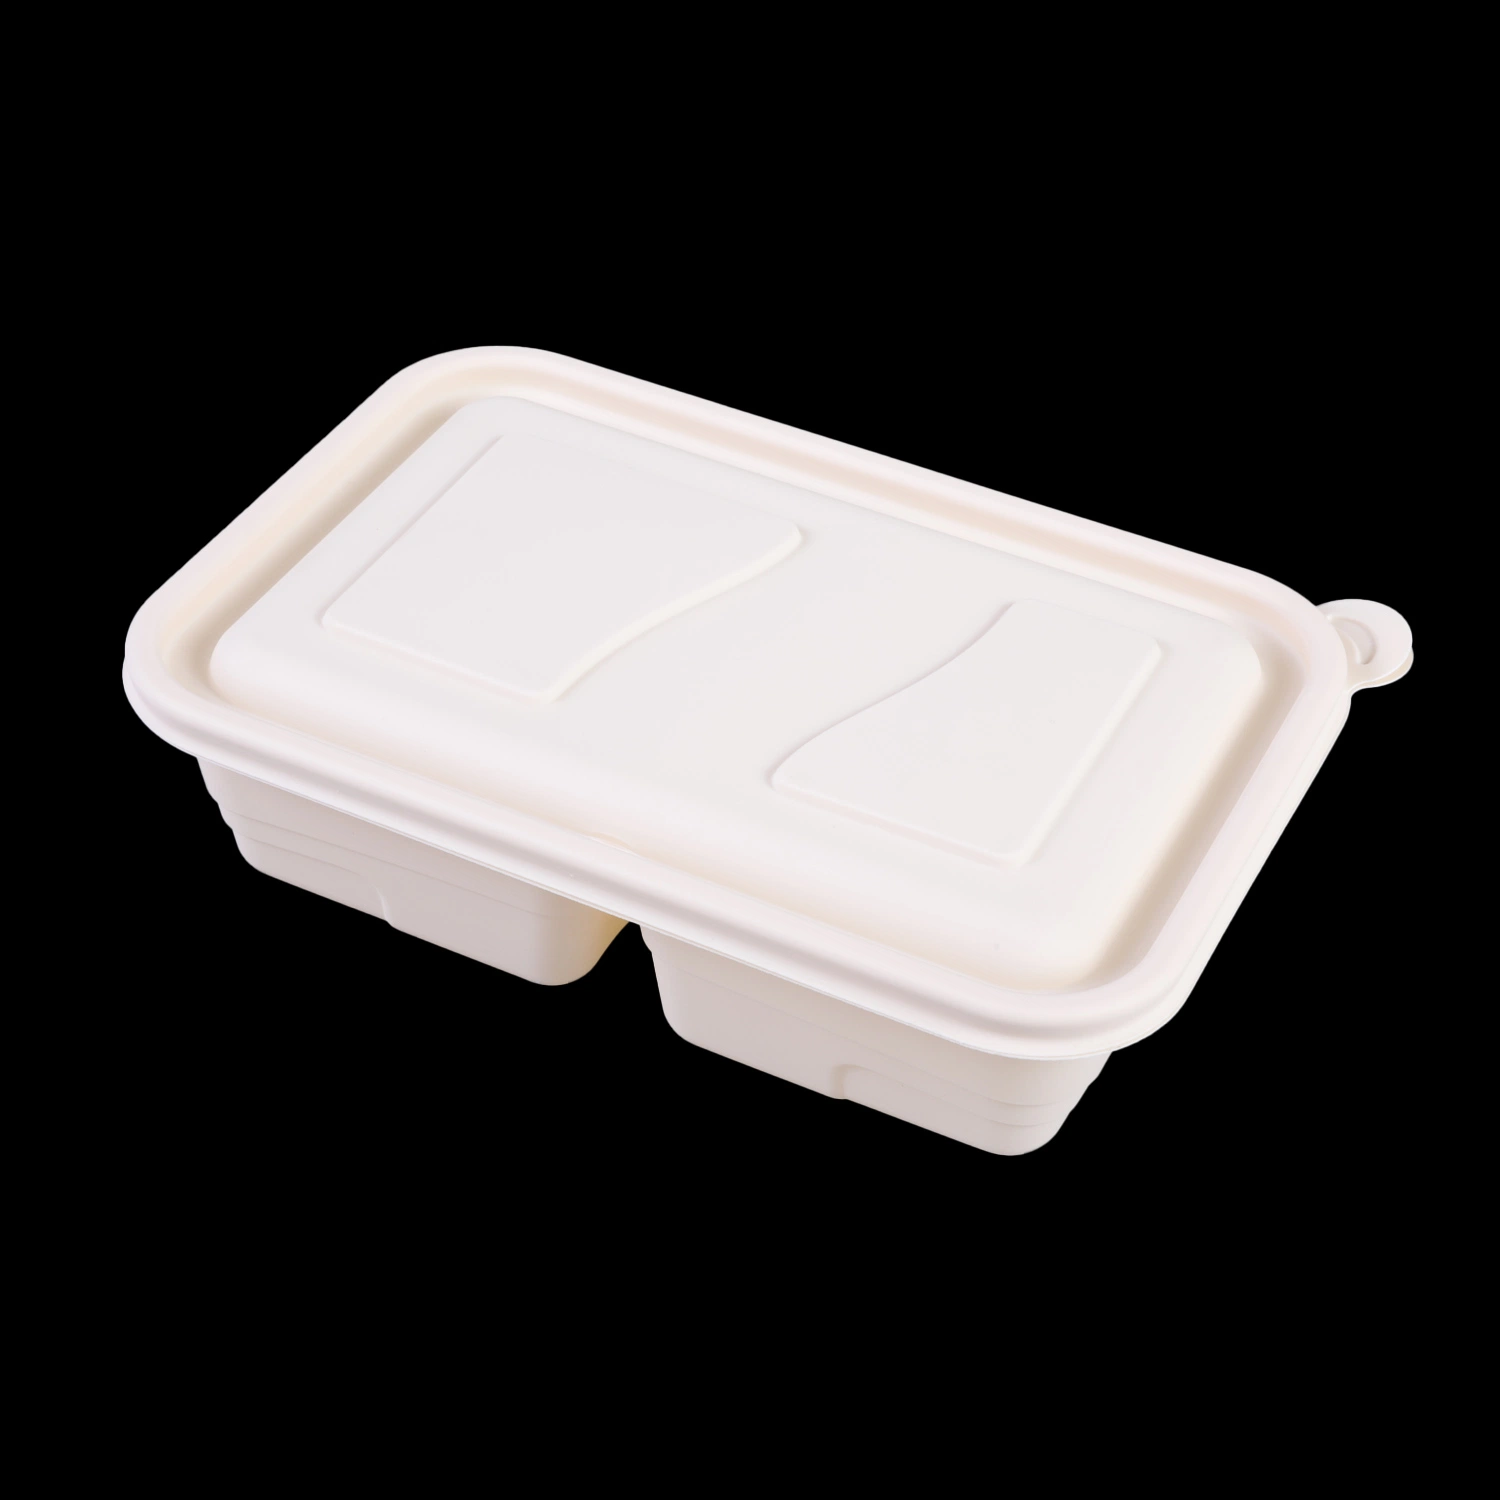 Disposable Food Box Food Container with Biodegradable Cornstarch Material